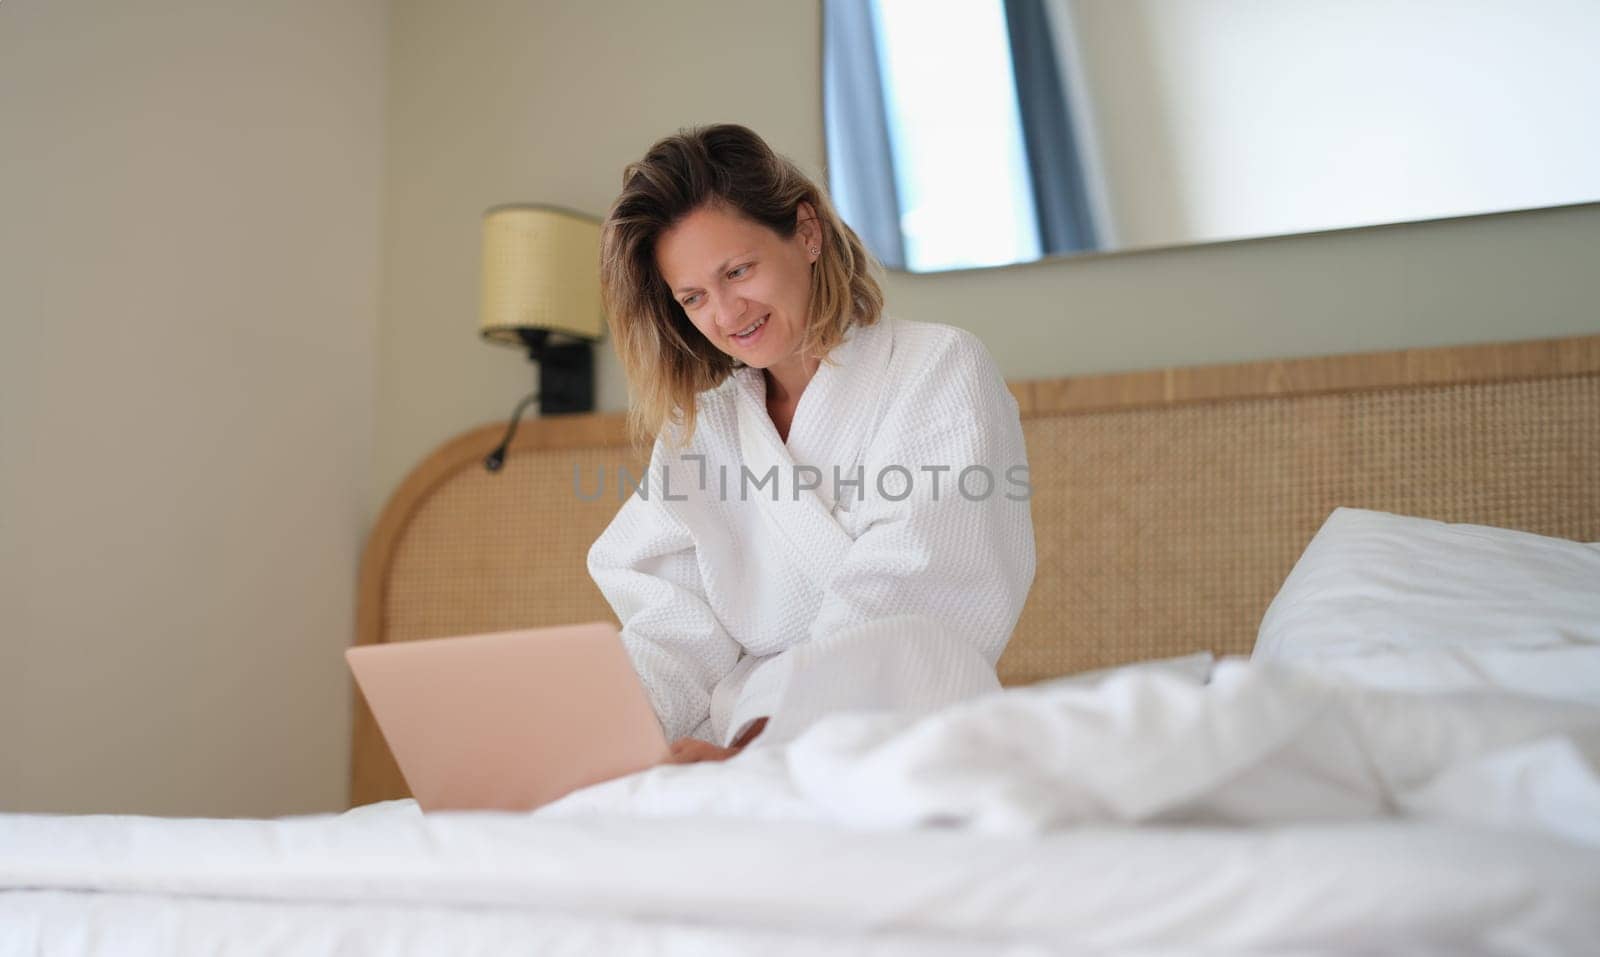 Woman sits at home on bed in white bathrobe and works on laptop. Work from home concept of quarantine and remote work freelancing